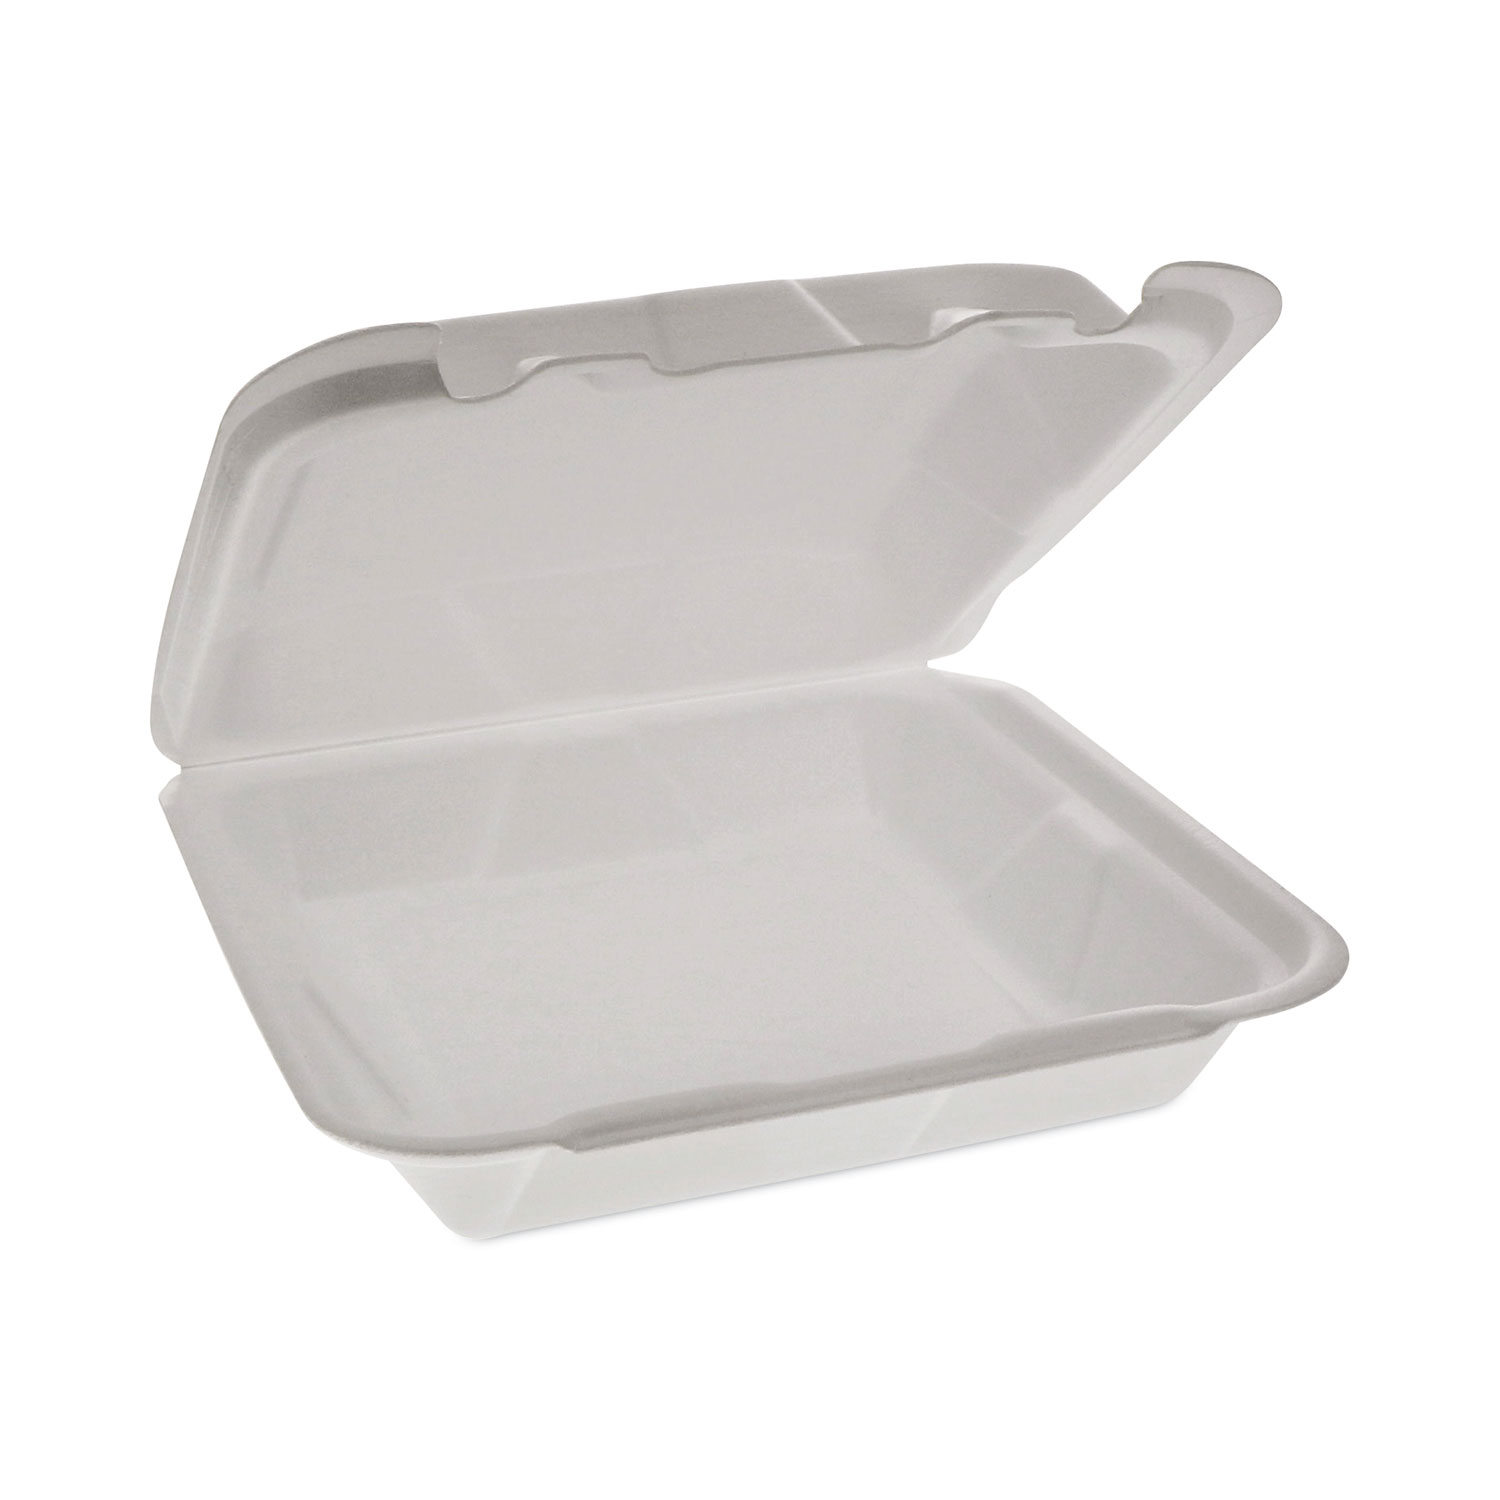 THREE LEAF 5 COMPARTMENT MEAL TRAY WITH LID SET, 200 SETS (8 PACKS